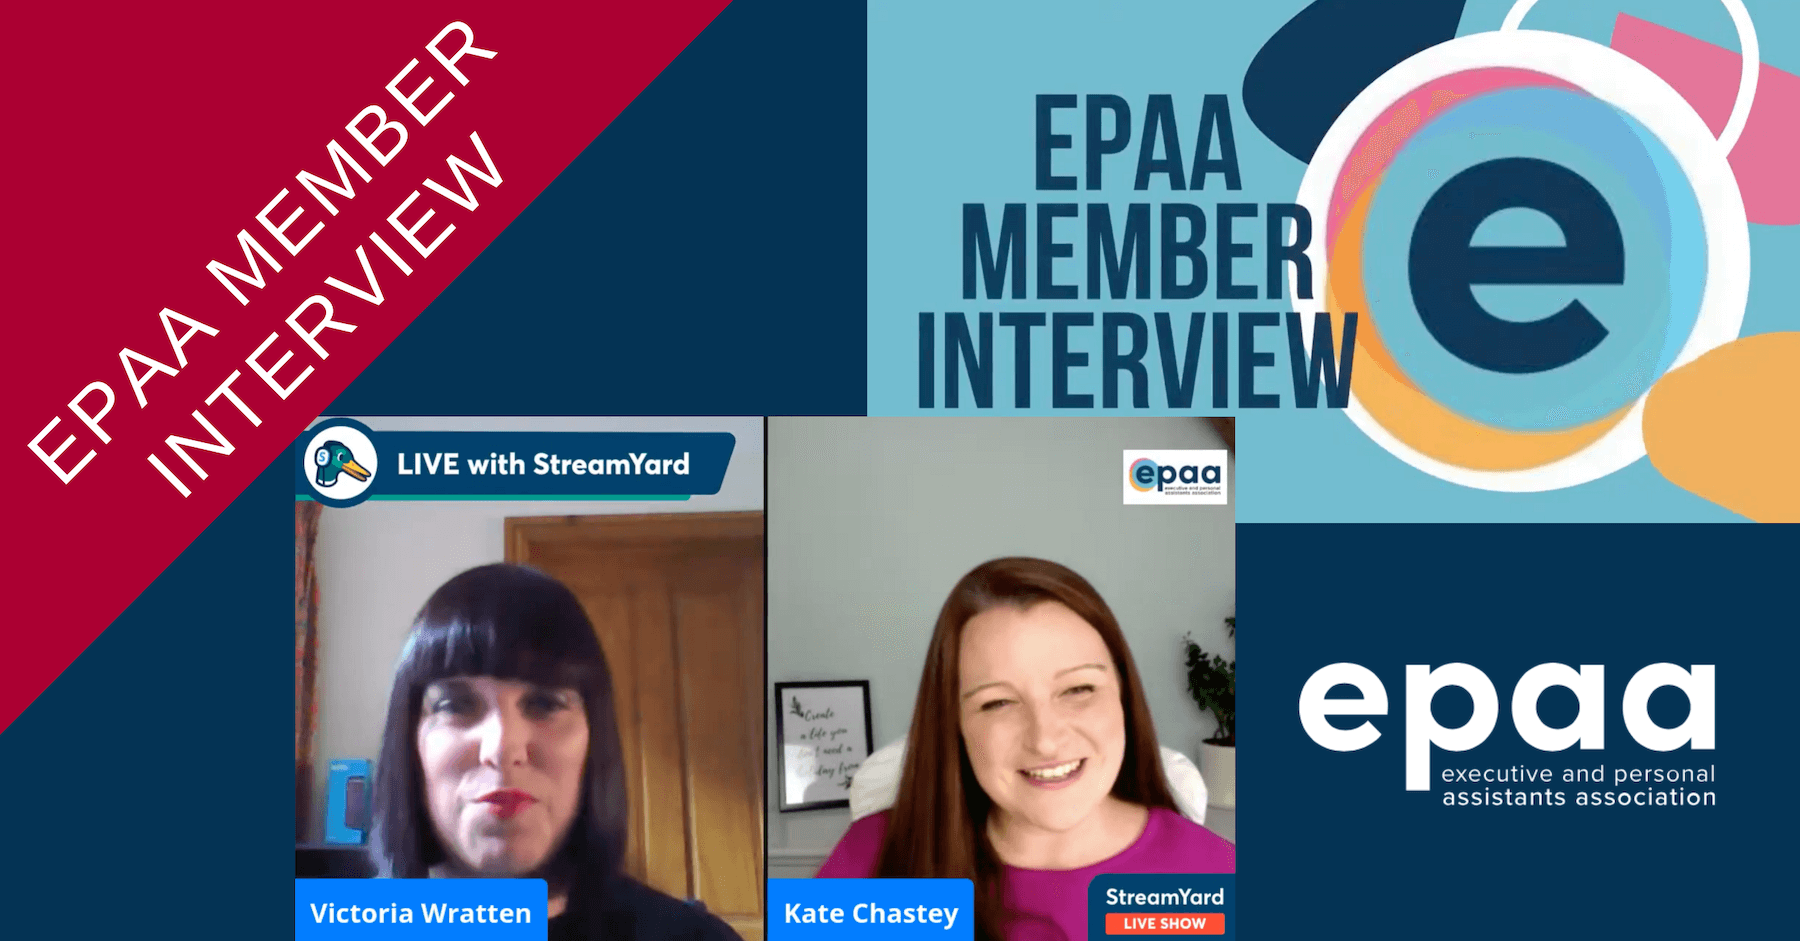 EPAA Member Interview with Kate